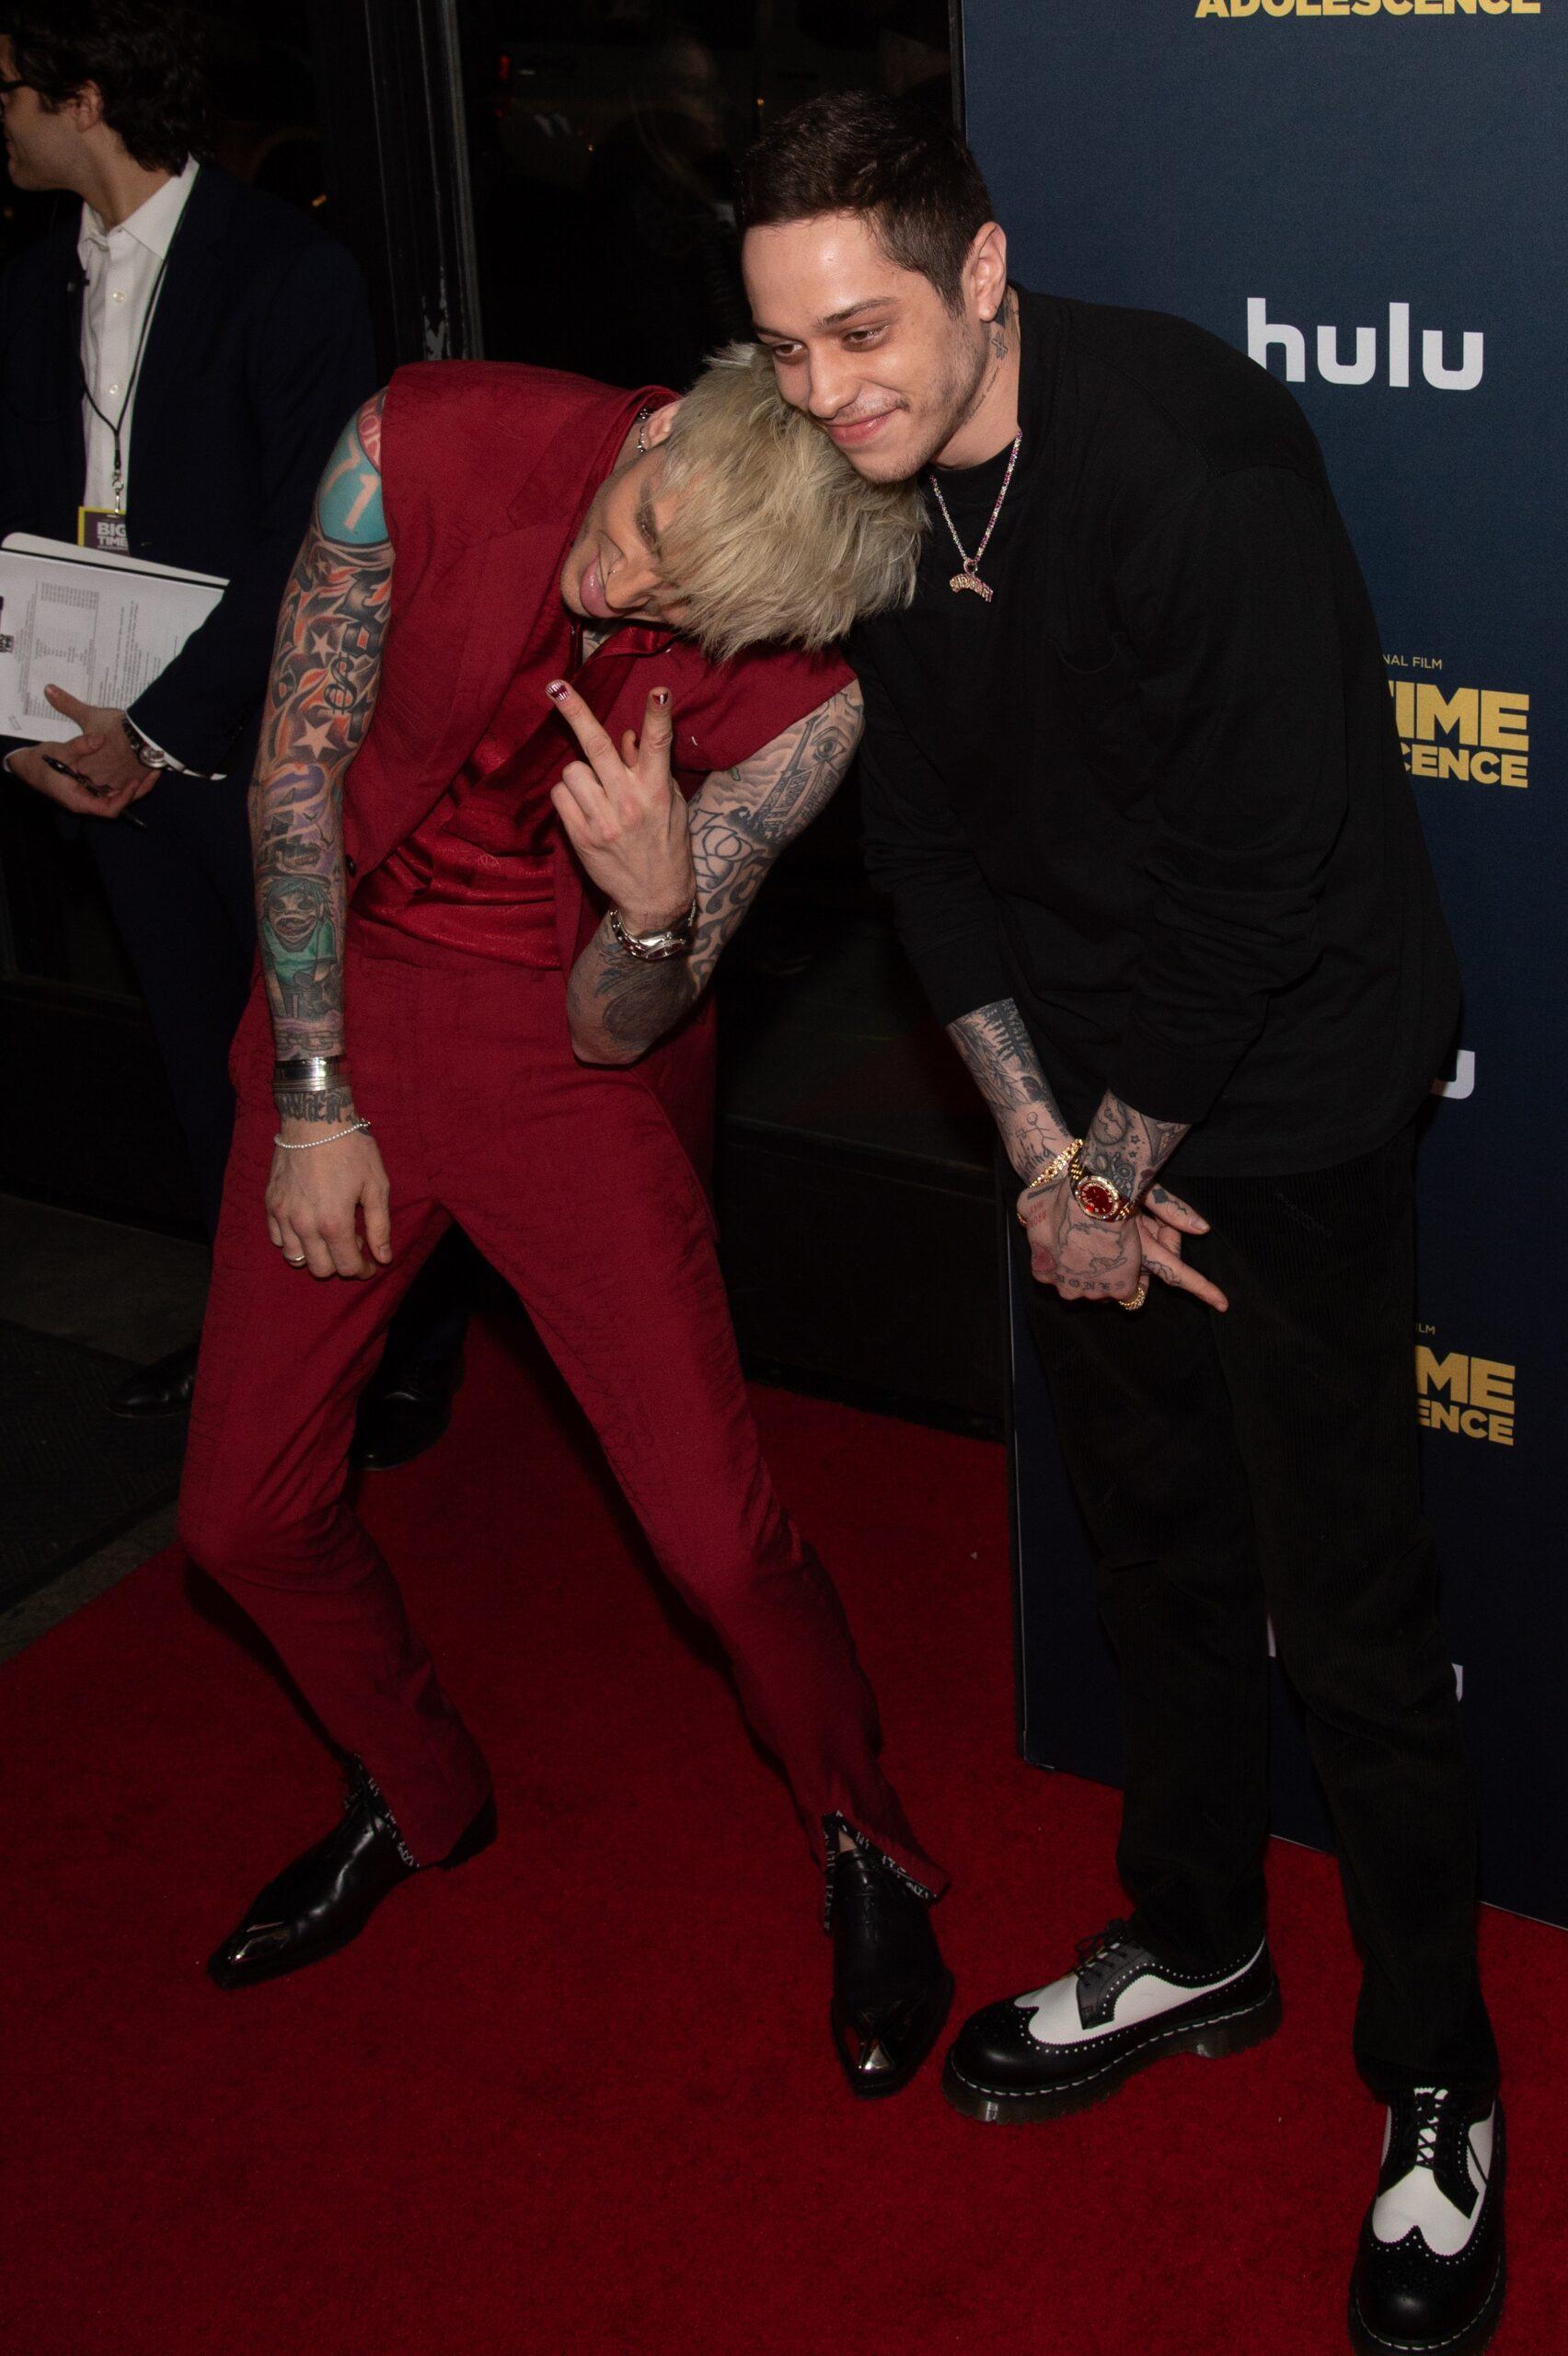 Machine Gun Kelly and Pete Davidson attend the premiere of "Big Time Adolescence" at Metrograph on March 05, 2020 in New York City